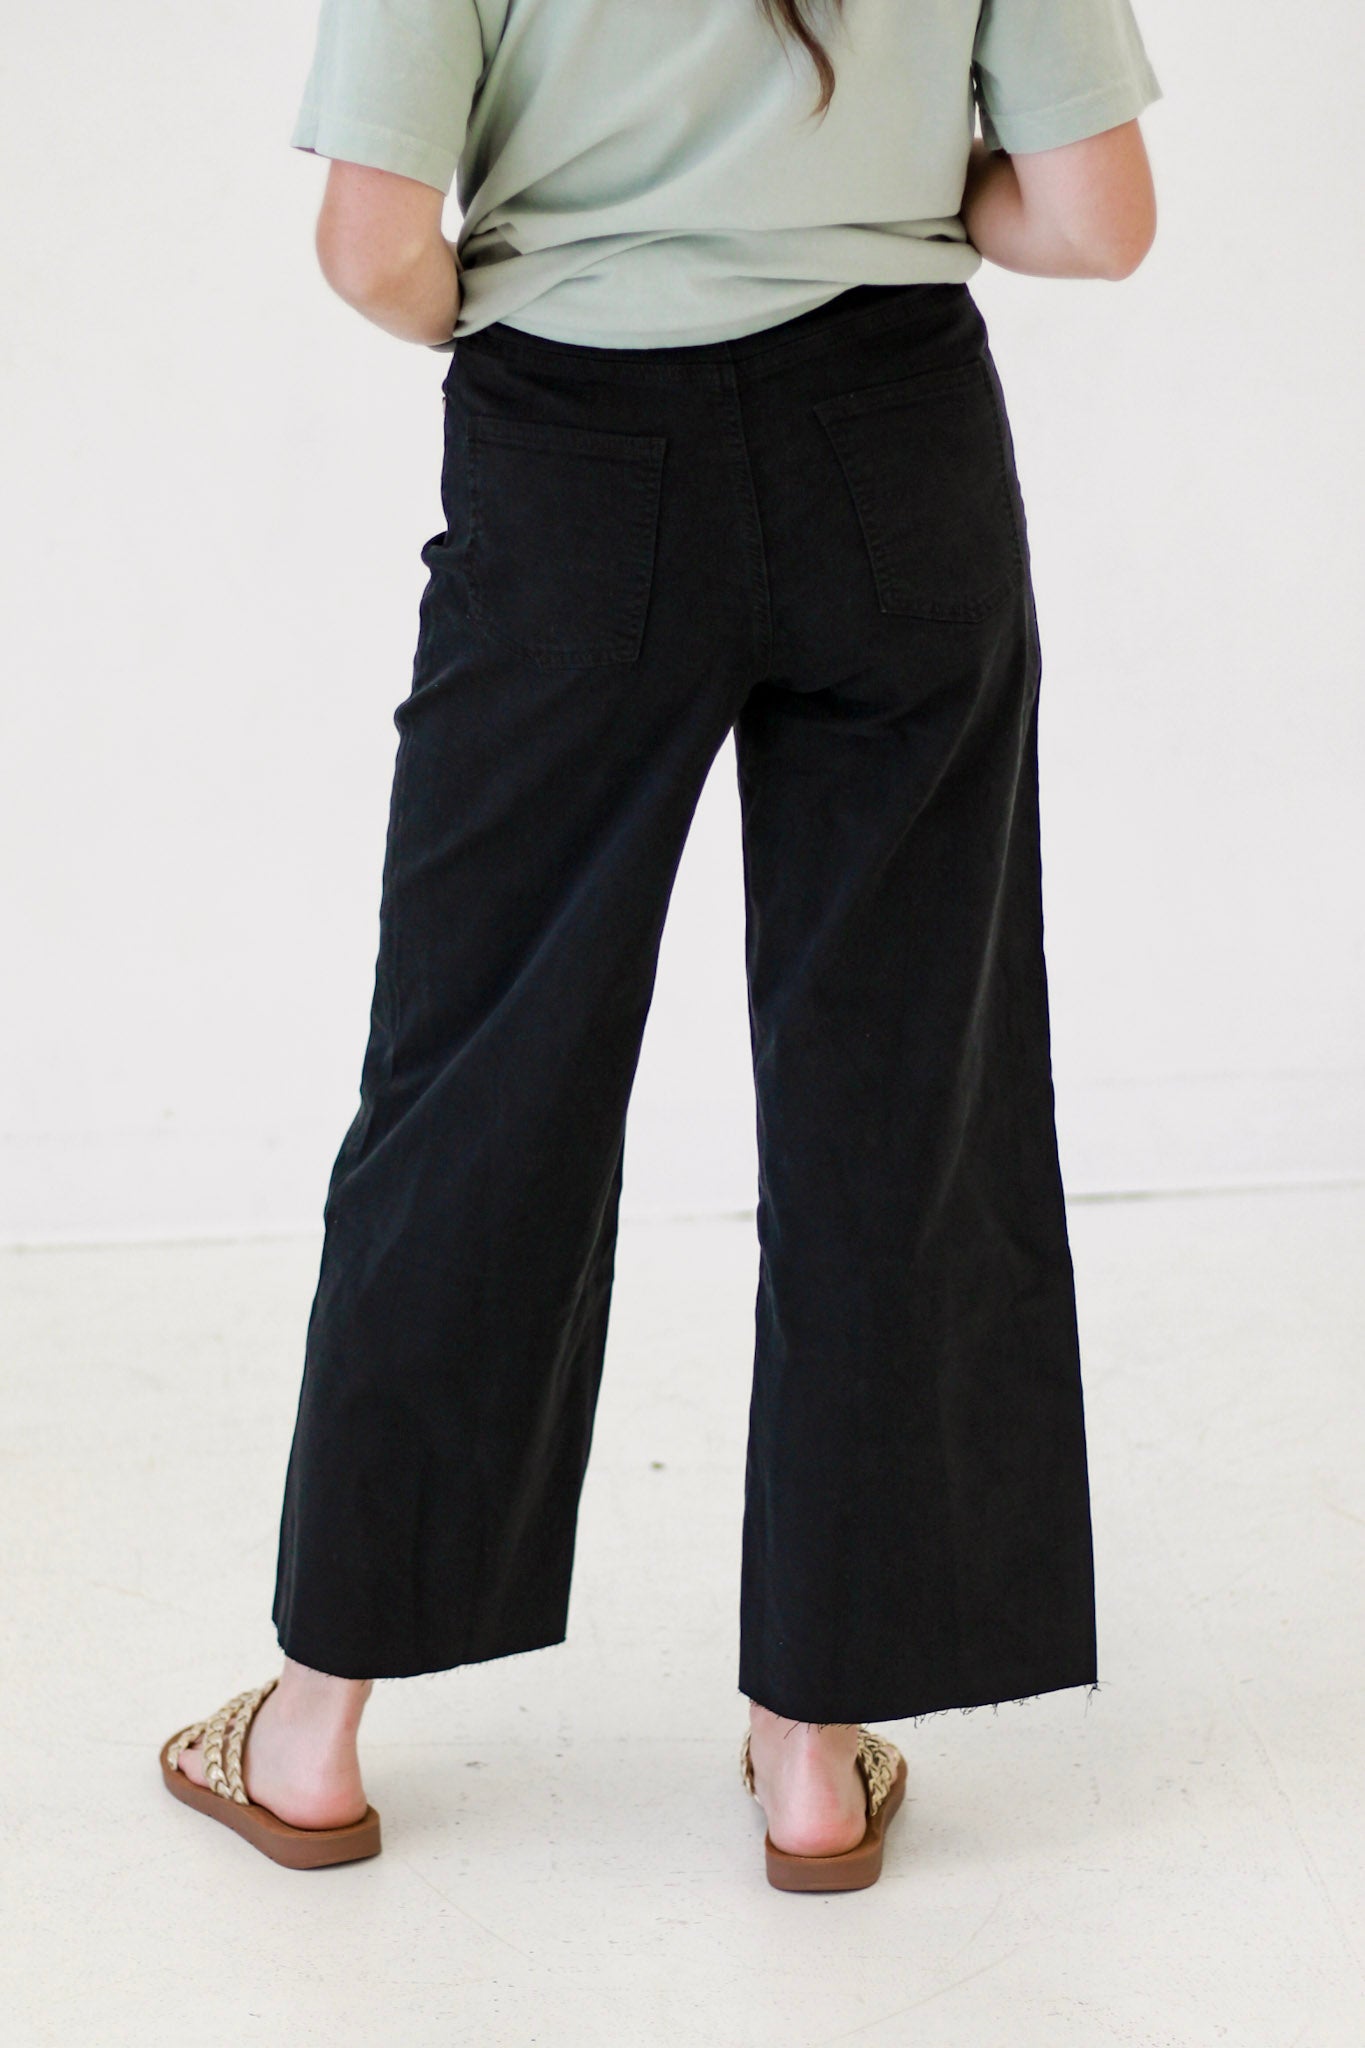 Downtown Vibes Wide Leg Pants in Black